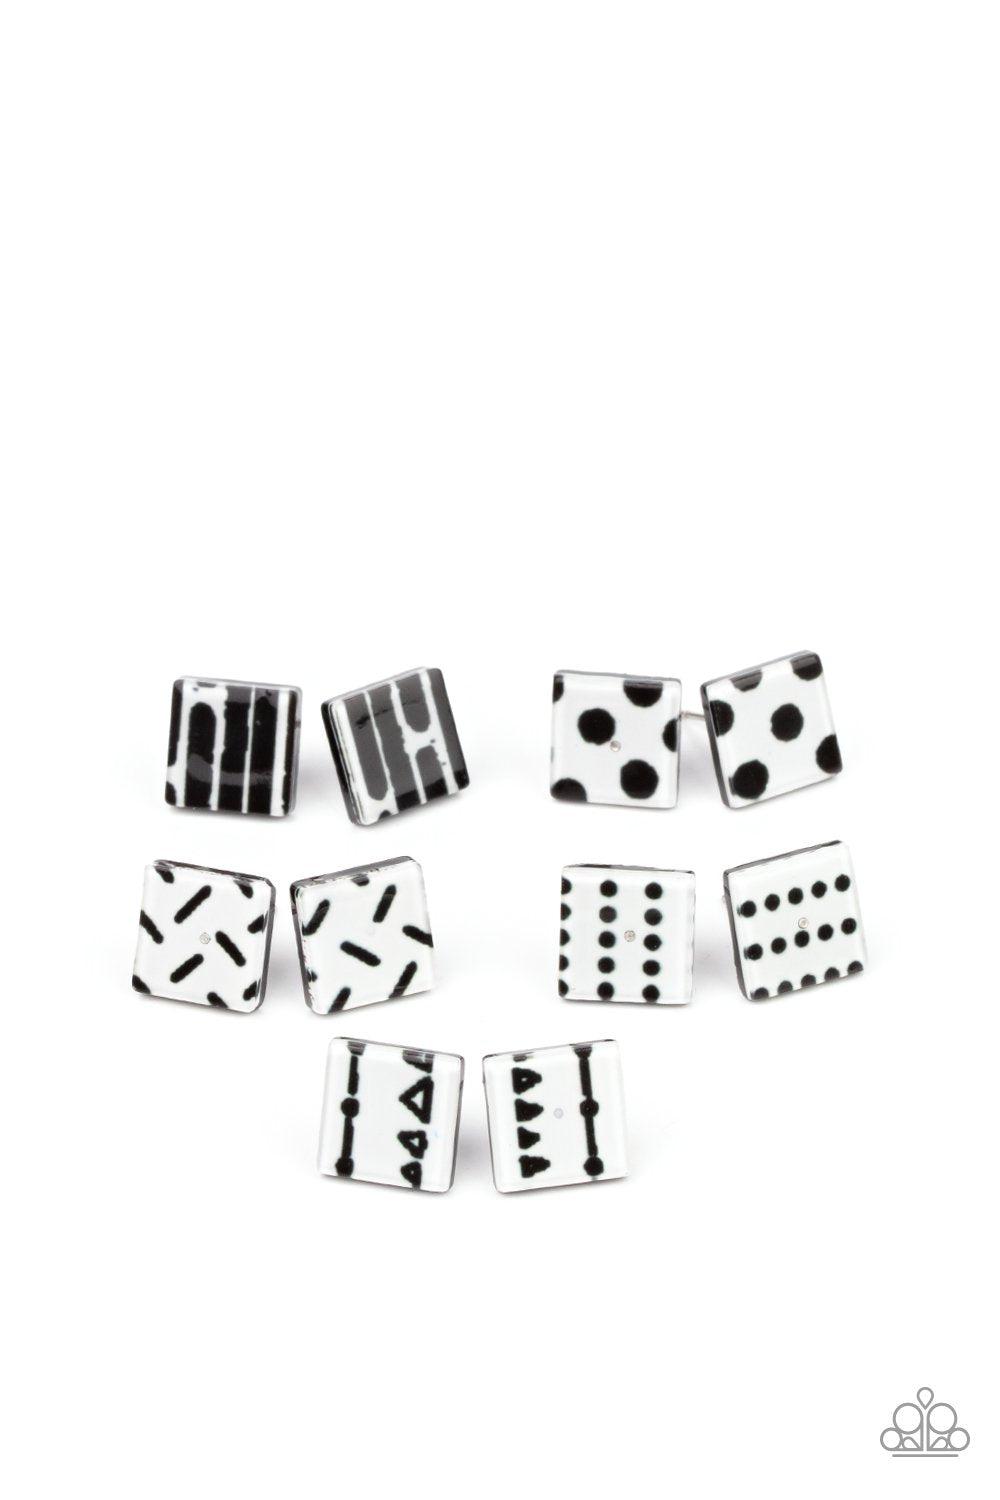 Starlet Shimmer Children&#39;s Black and White Post Earrings - Paparazzi Accessories (set of 5 pairs) - Full set -CarasShop.com - $5 Jewelry by Cara Jewels